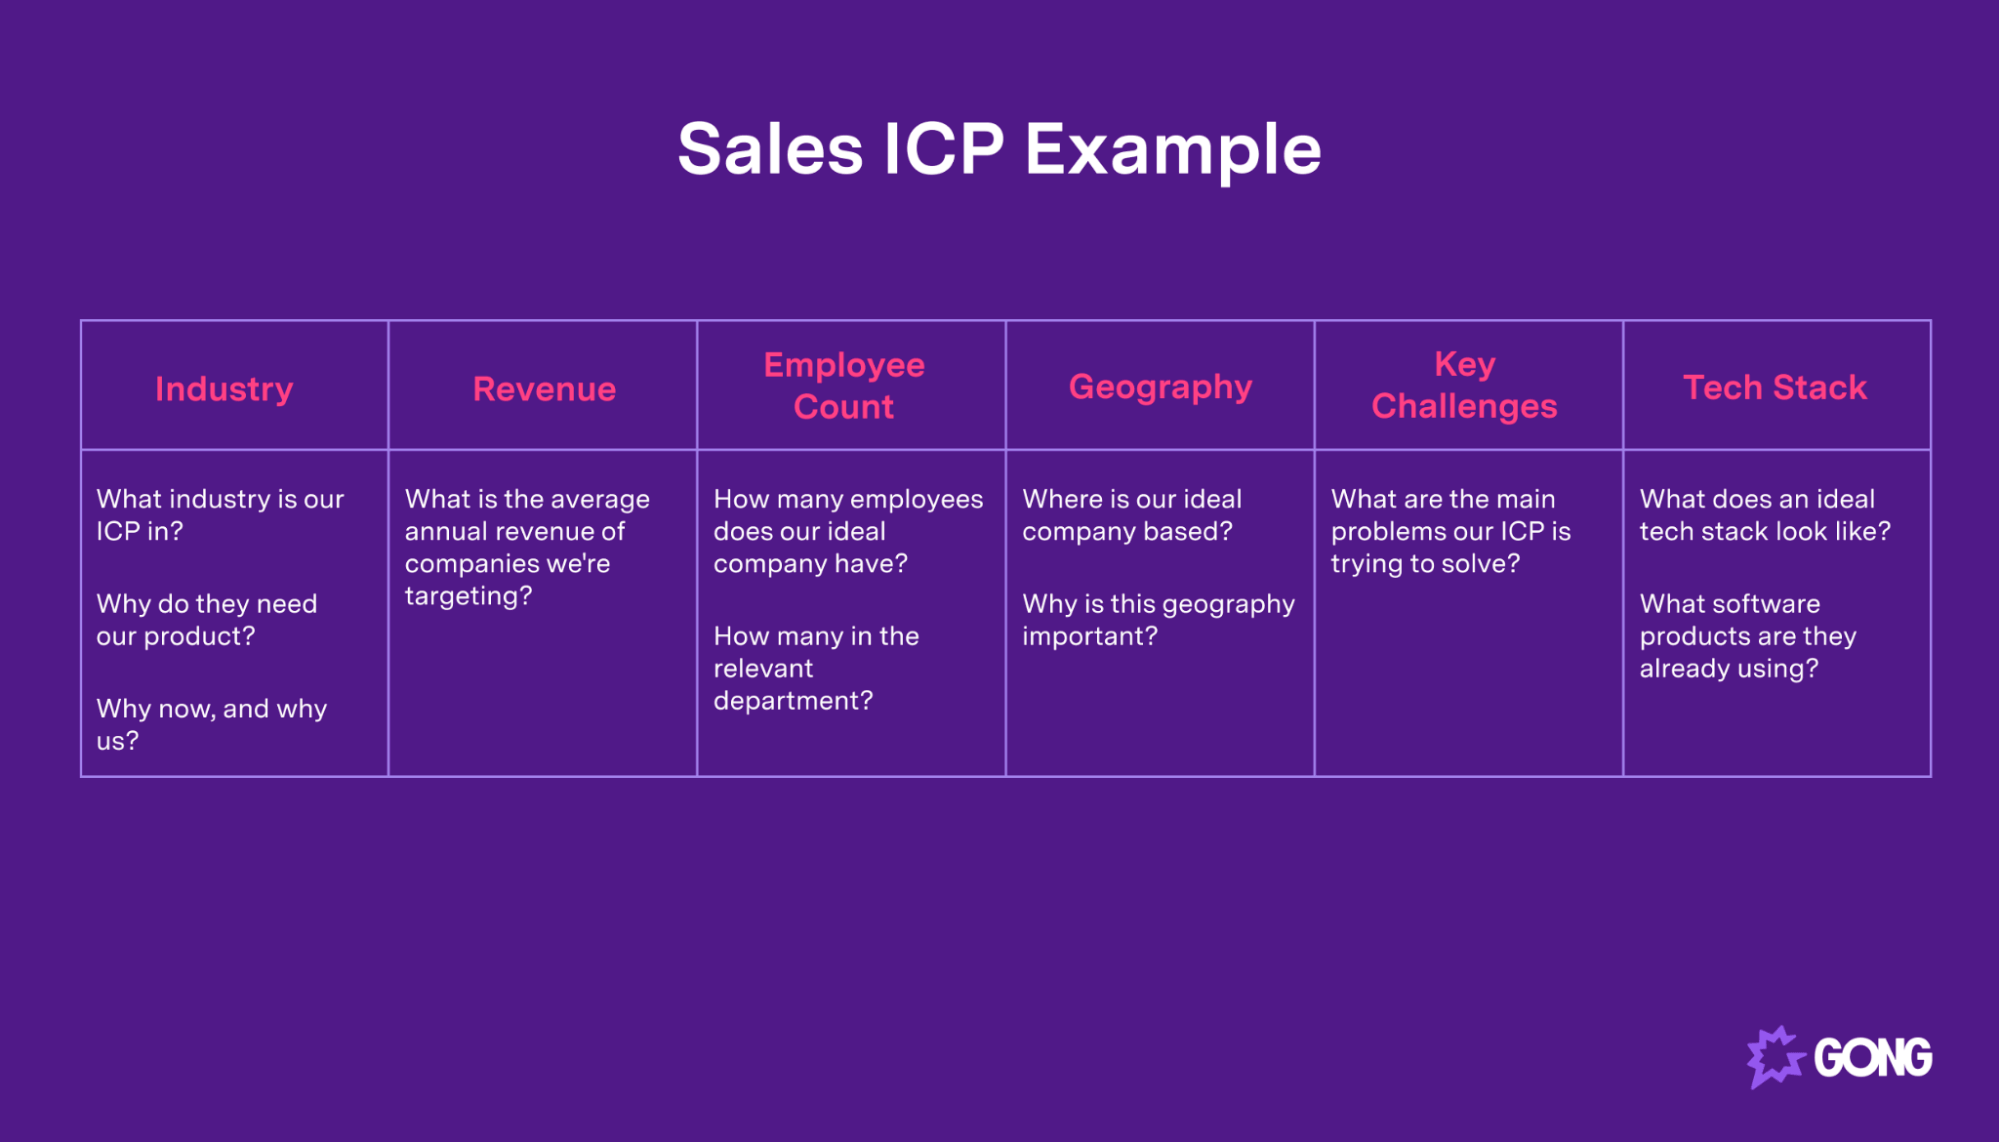 An example of a sales ICP